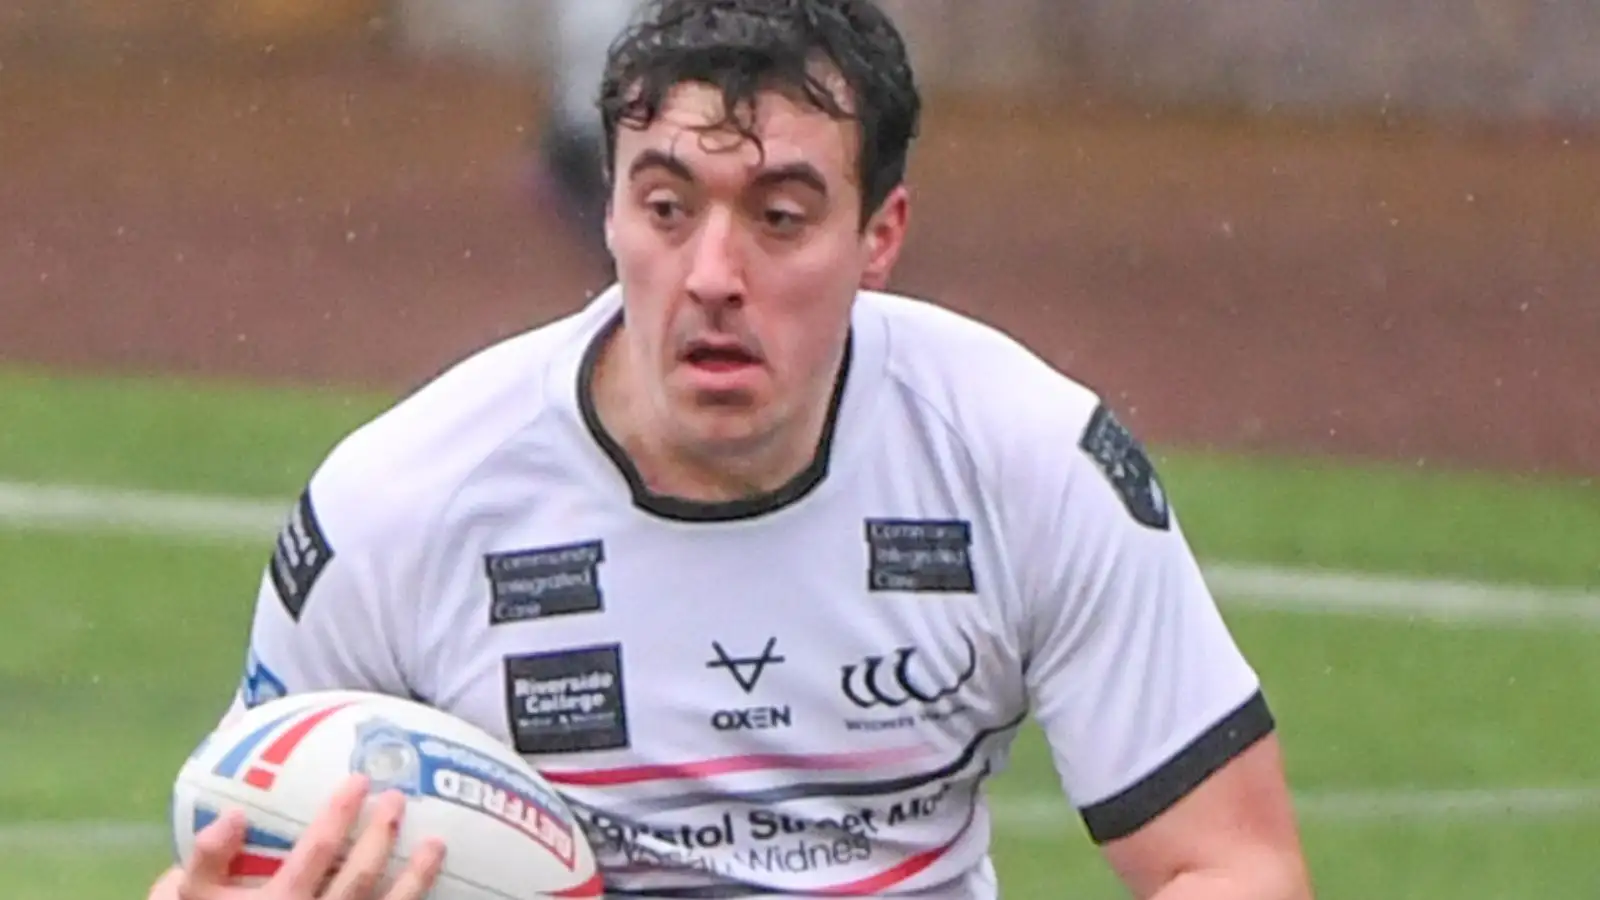 Widnes Vikings duo head to League 1 on dual-registration amid squad shake-up